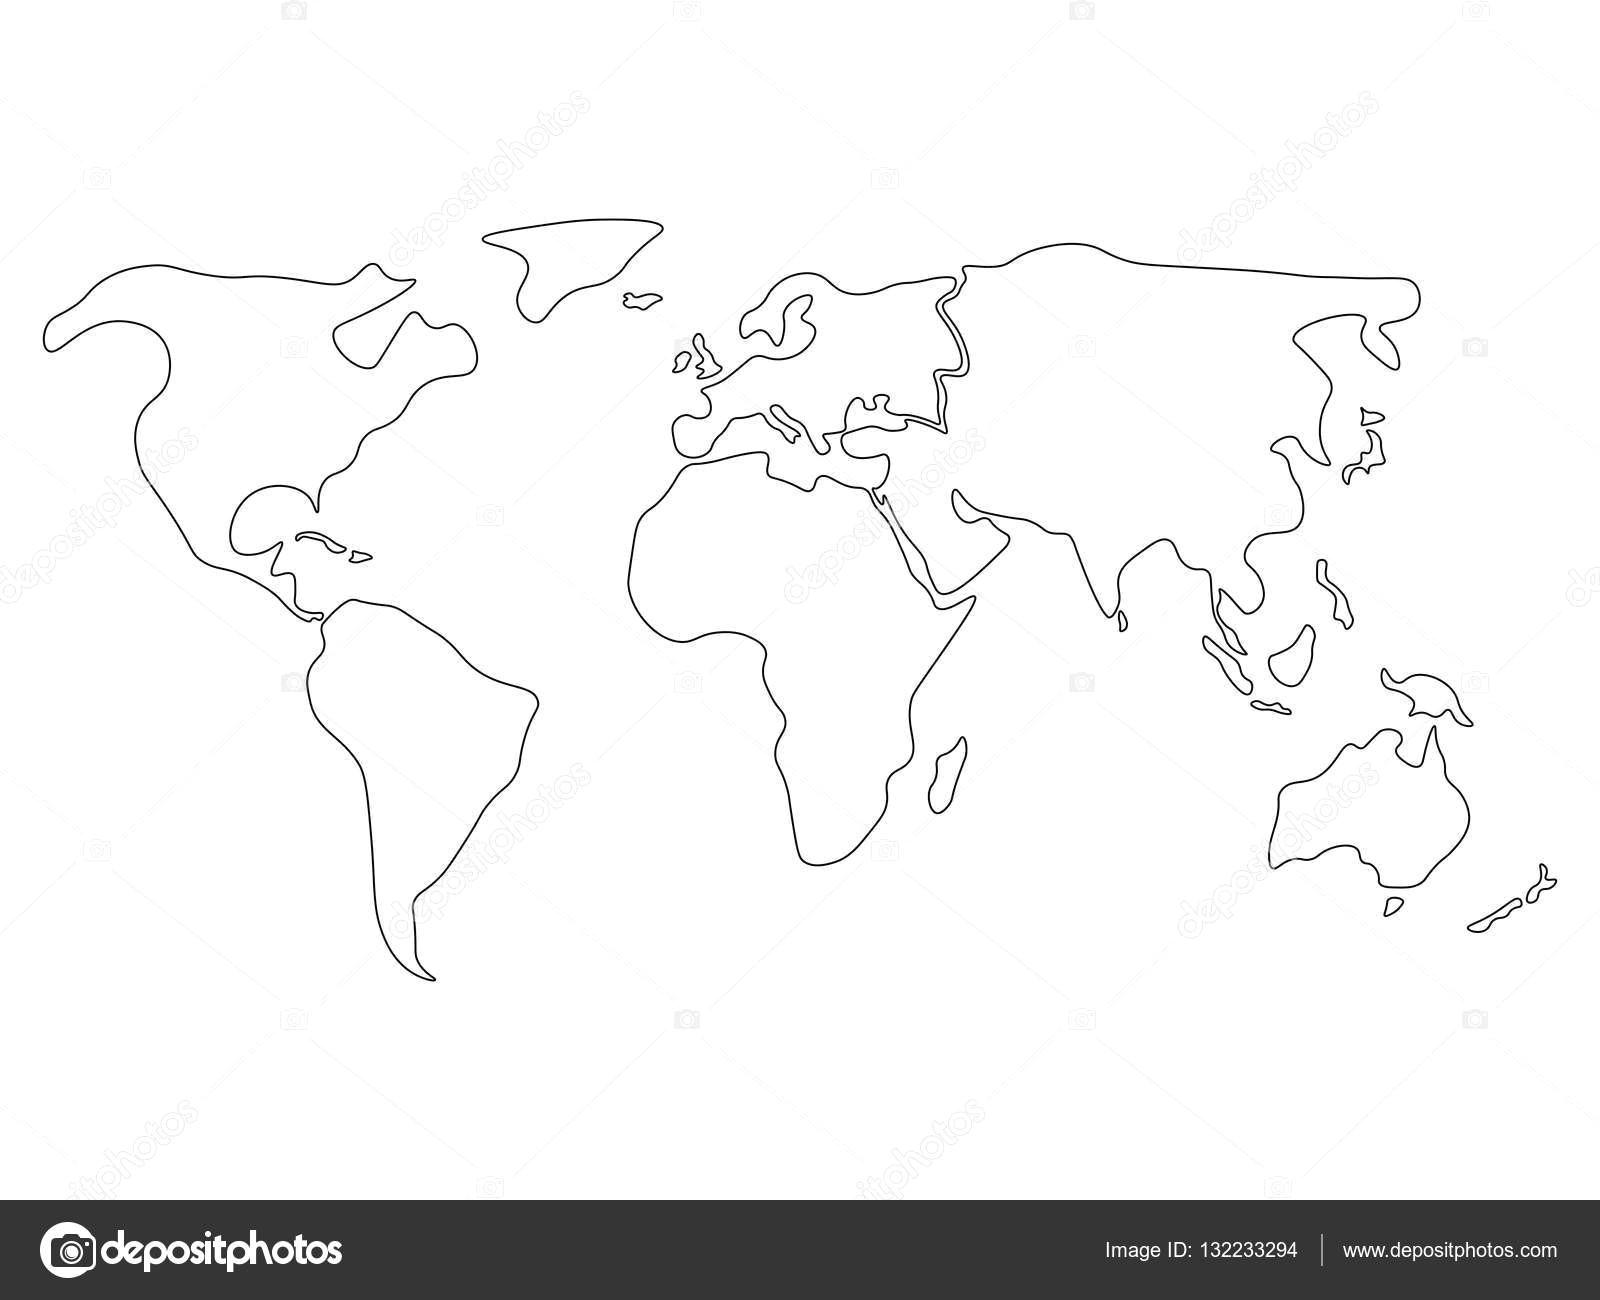 How to Draw the Continents Easy Easy Draw Map Of the World Map Easy to Draw Easy World Maps